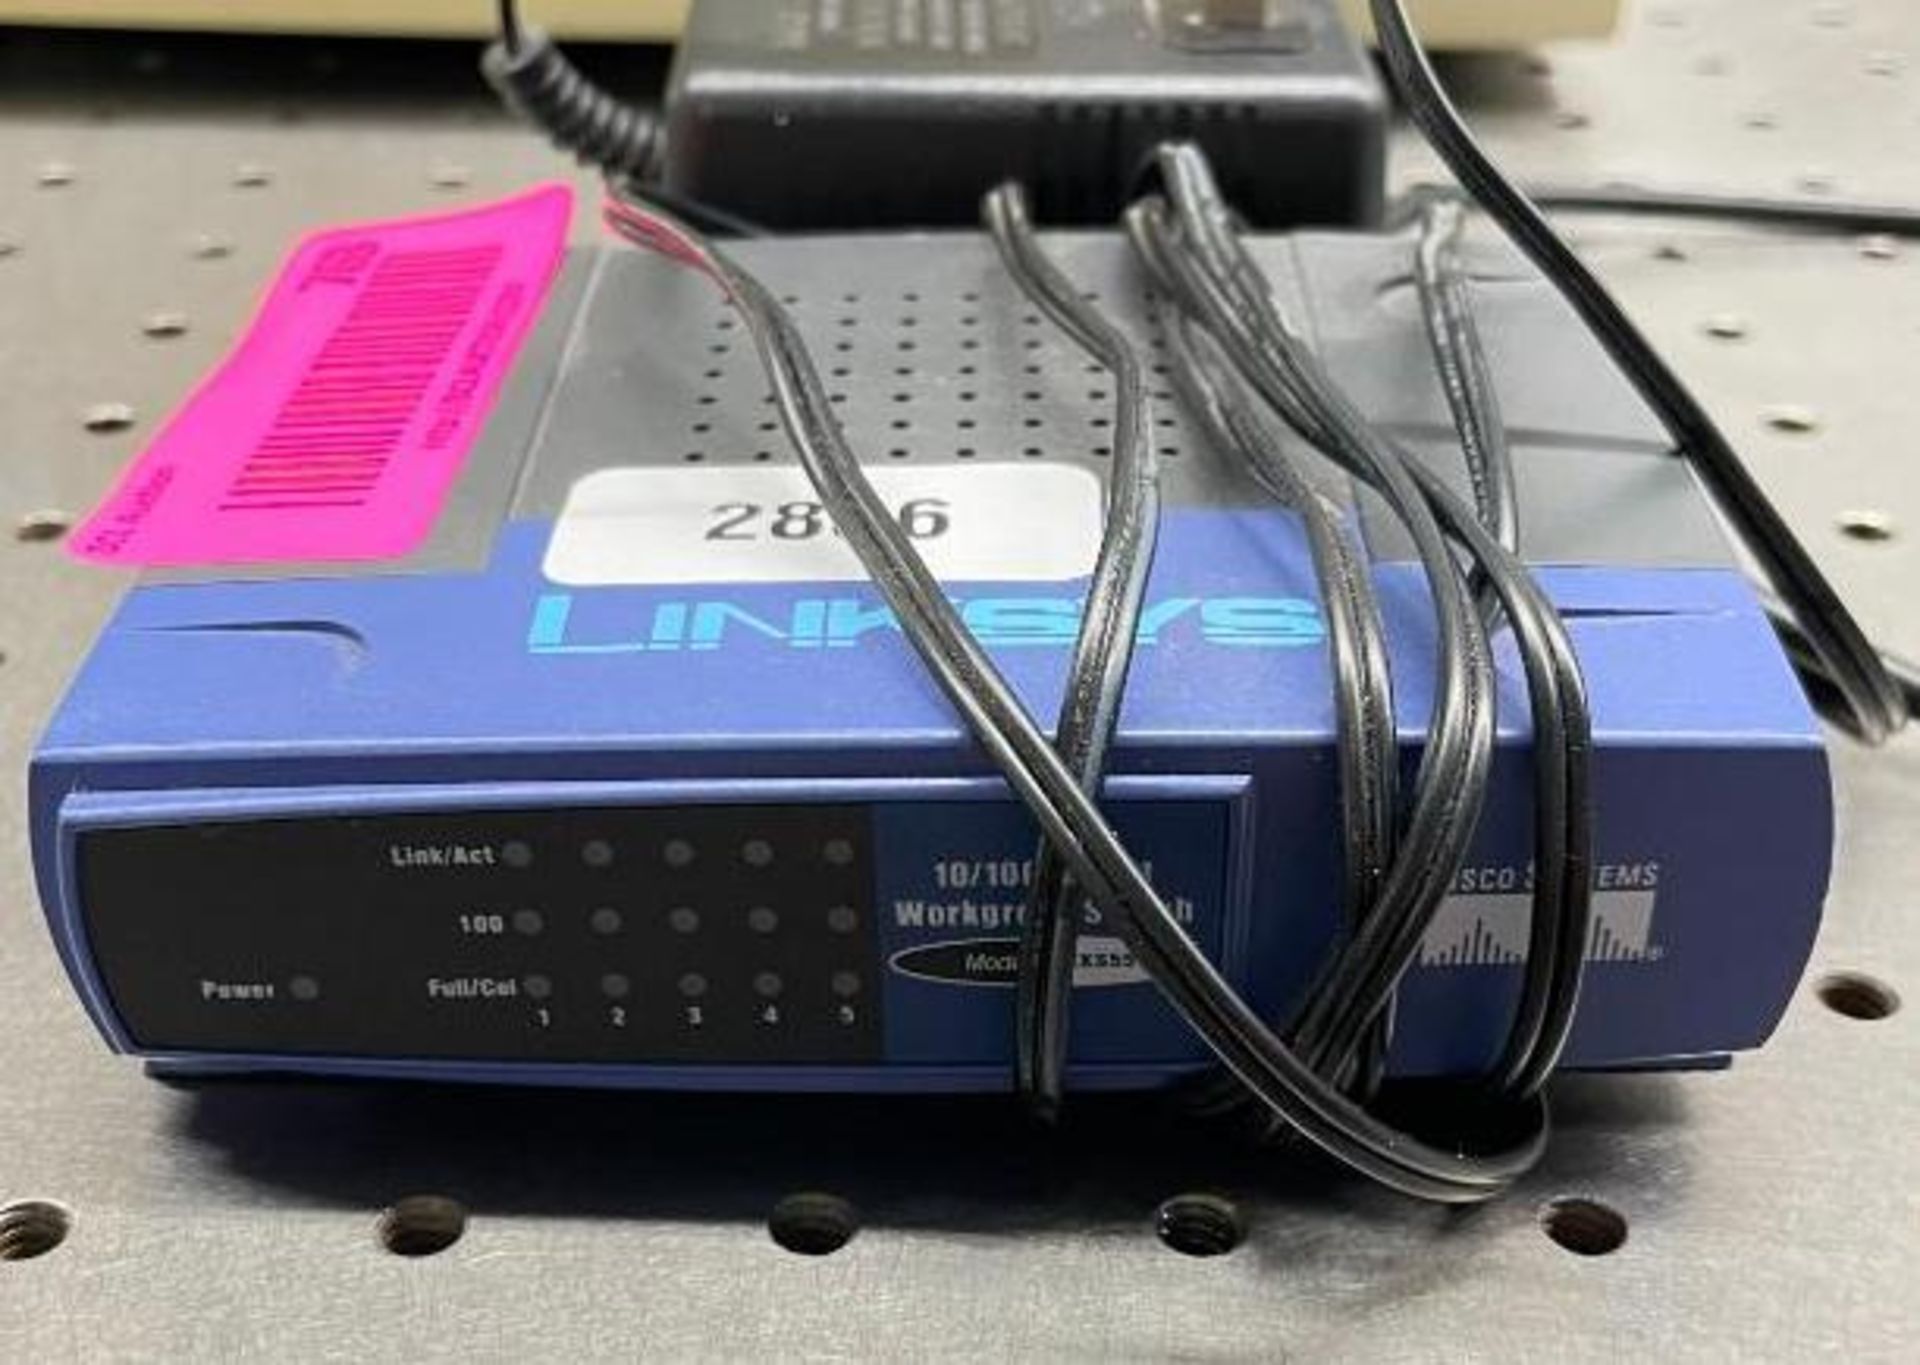 5-PORT LINK SYSTEM WORK GROUP SWITCH BRAND/MODEL: CISCO QTY: 1